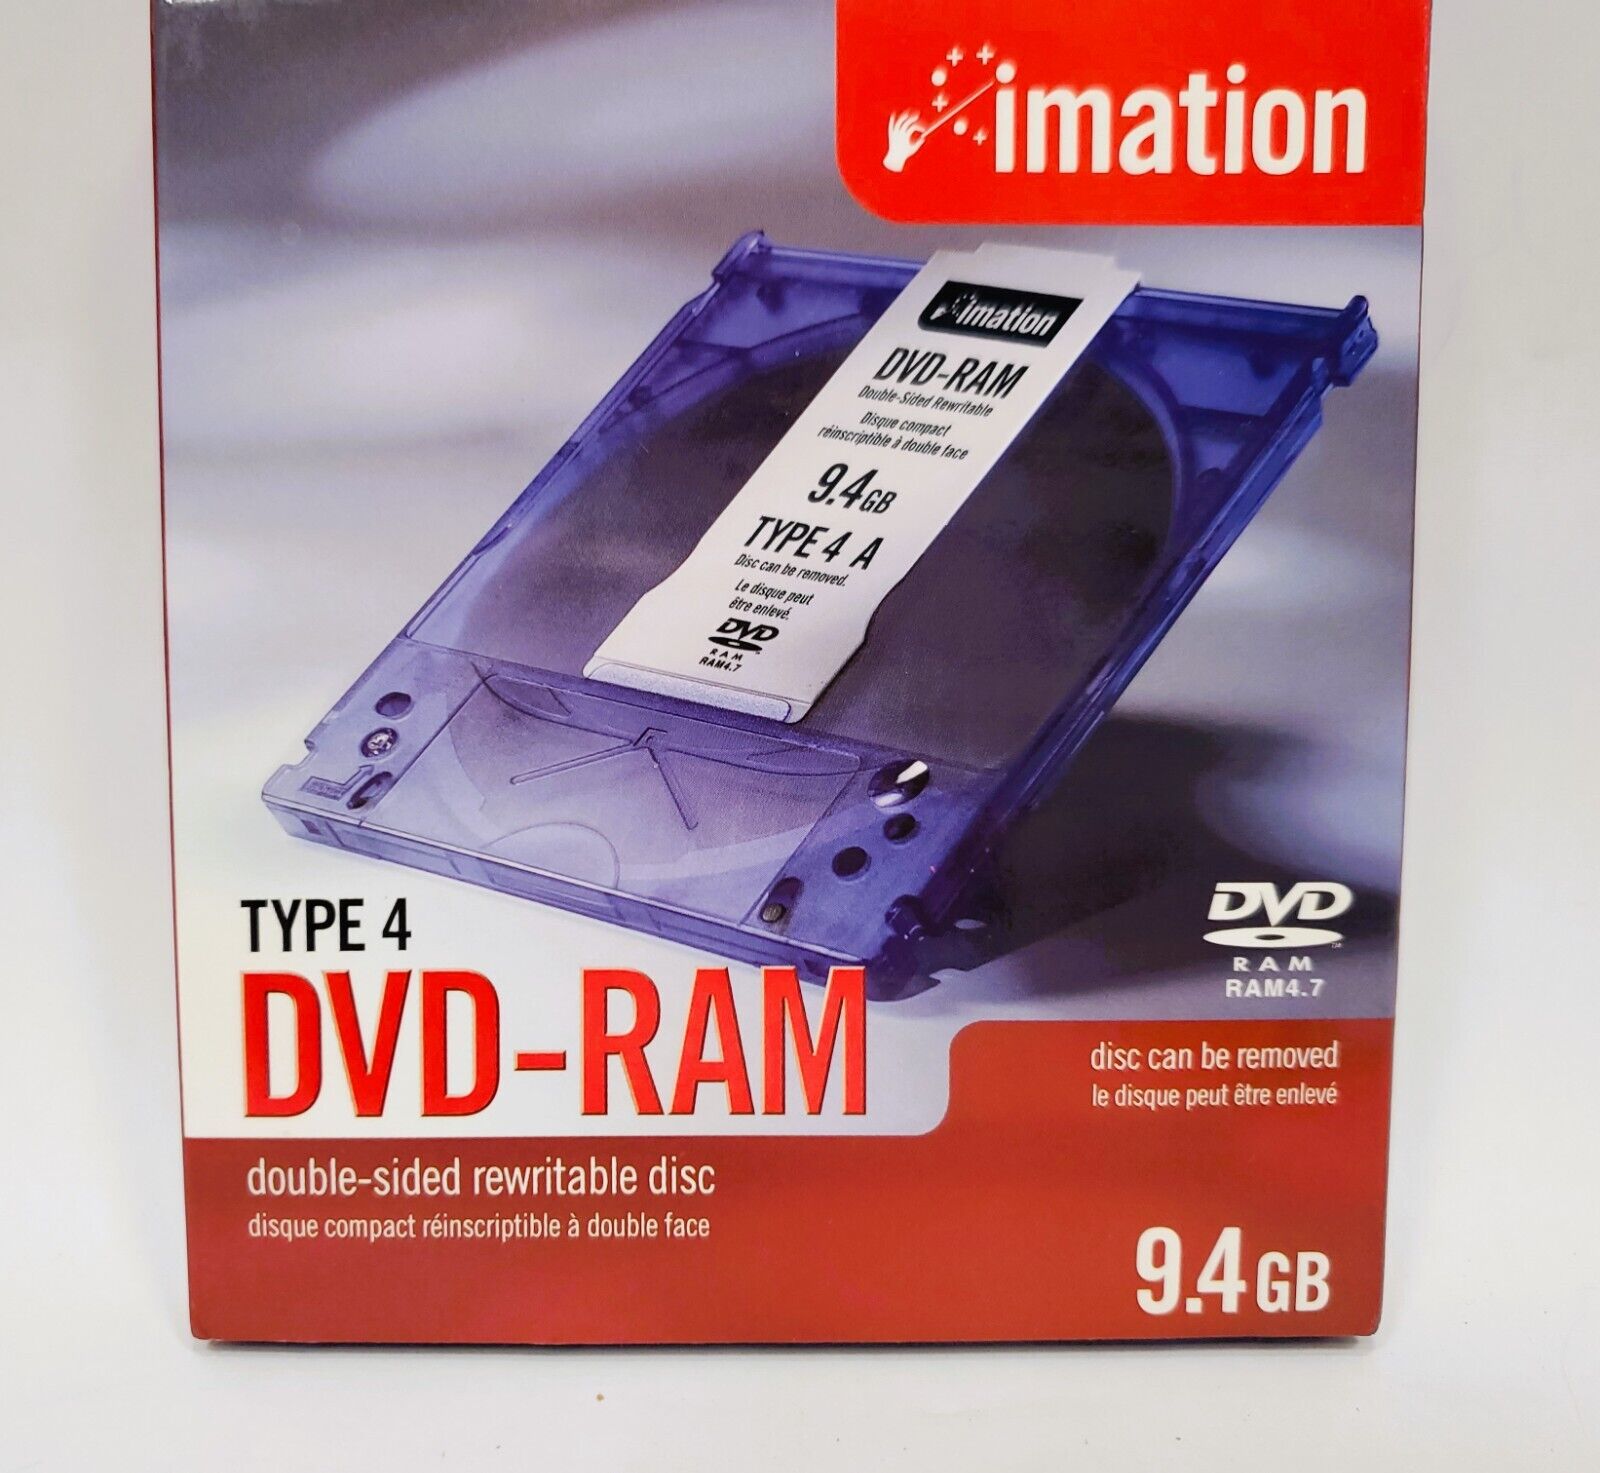 Imation DVD-RAM 9.4GB Double Sided Rewritable Disc